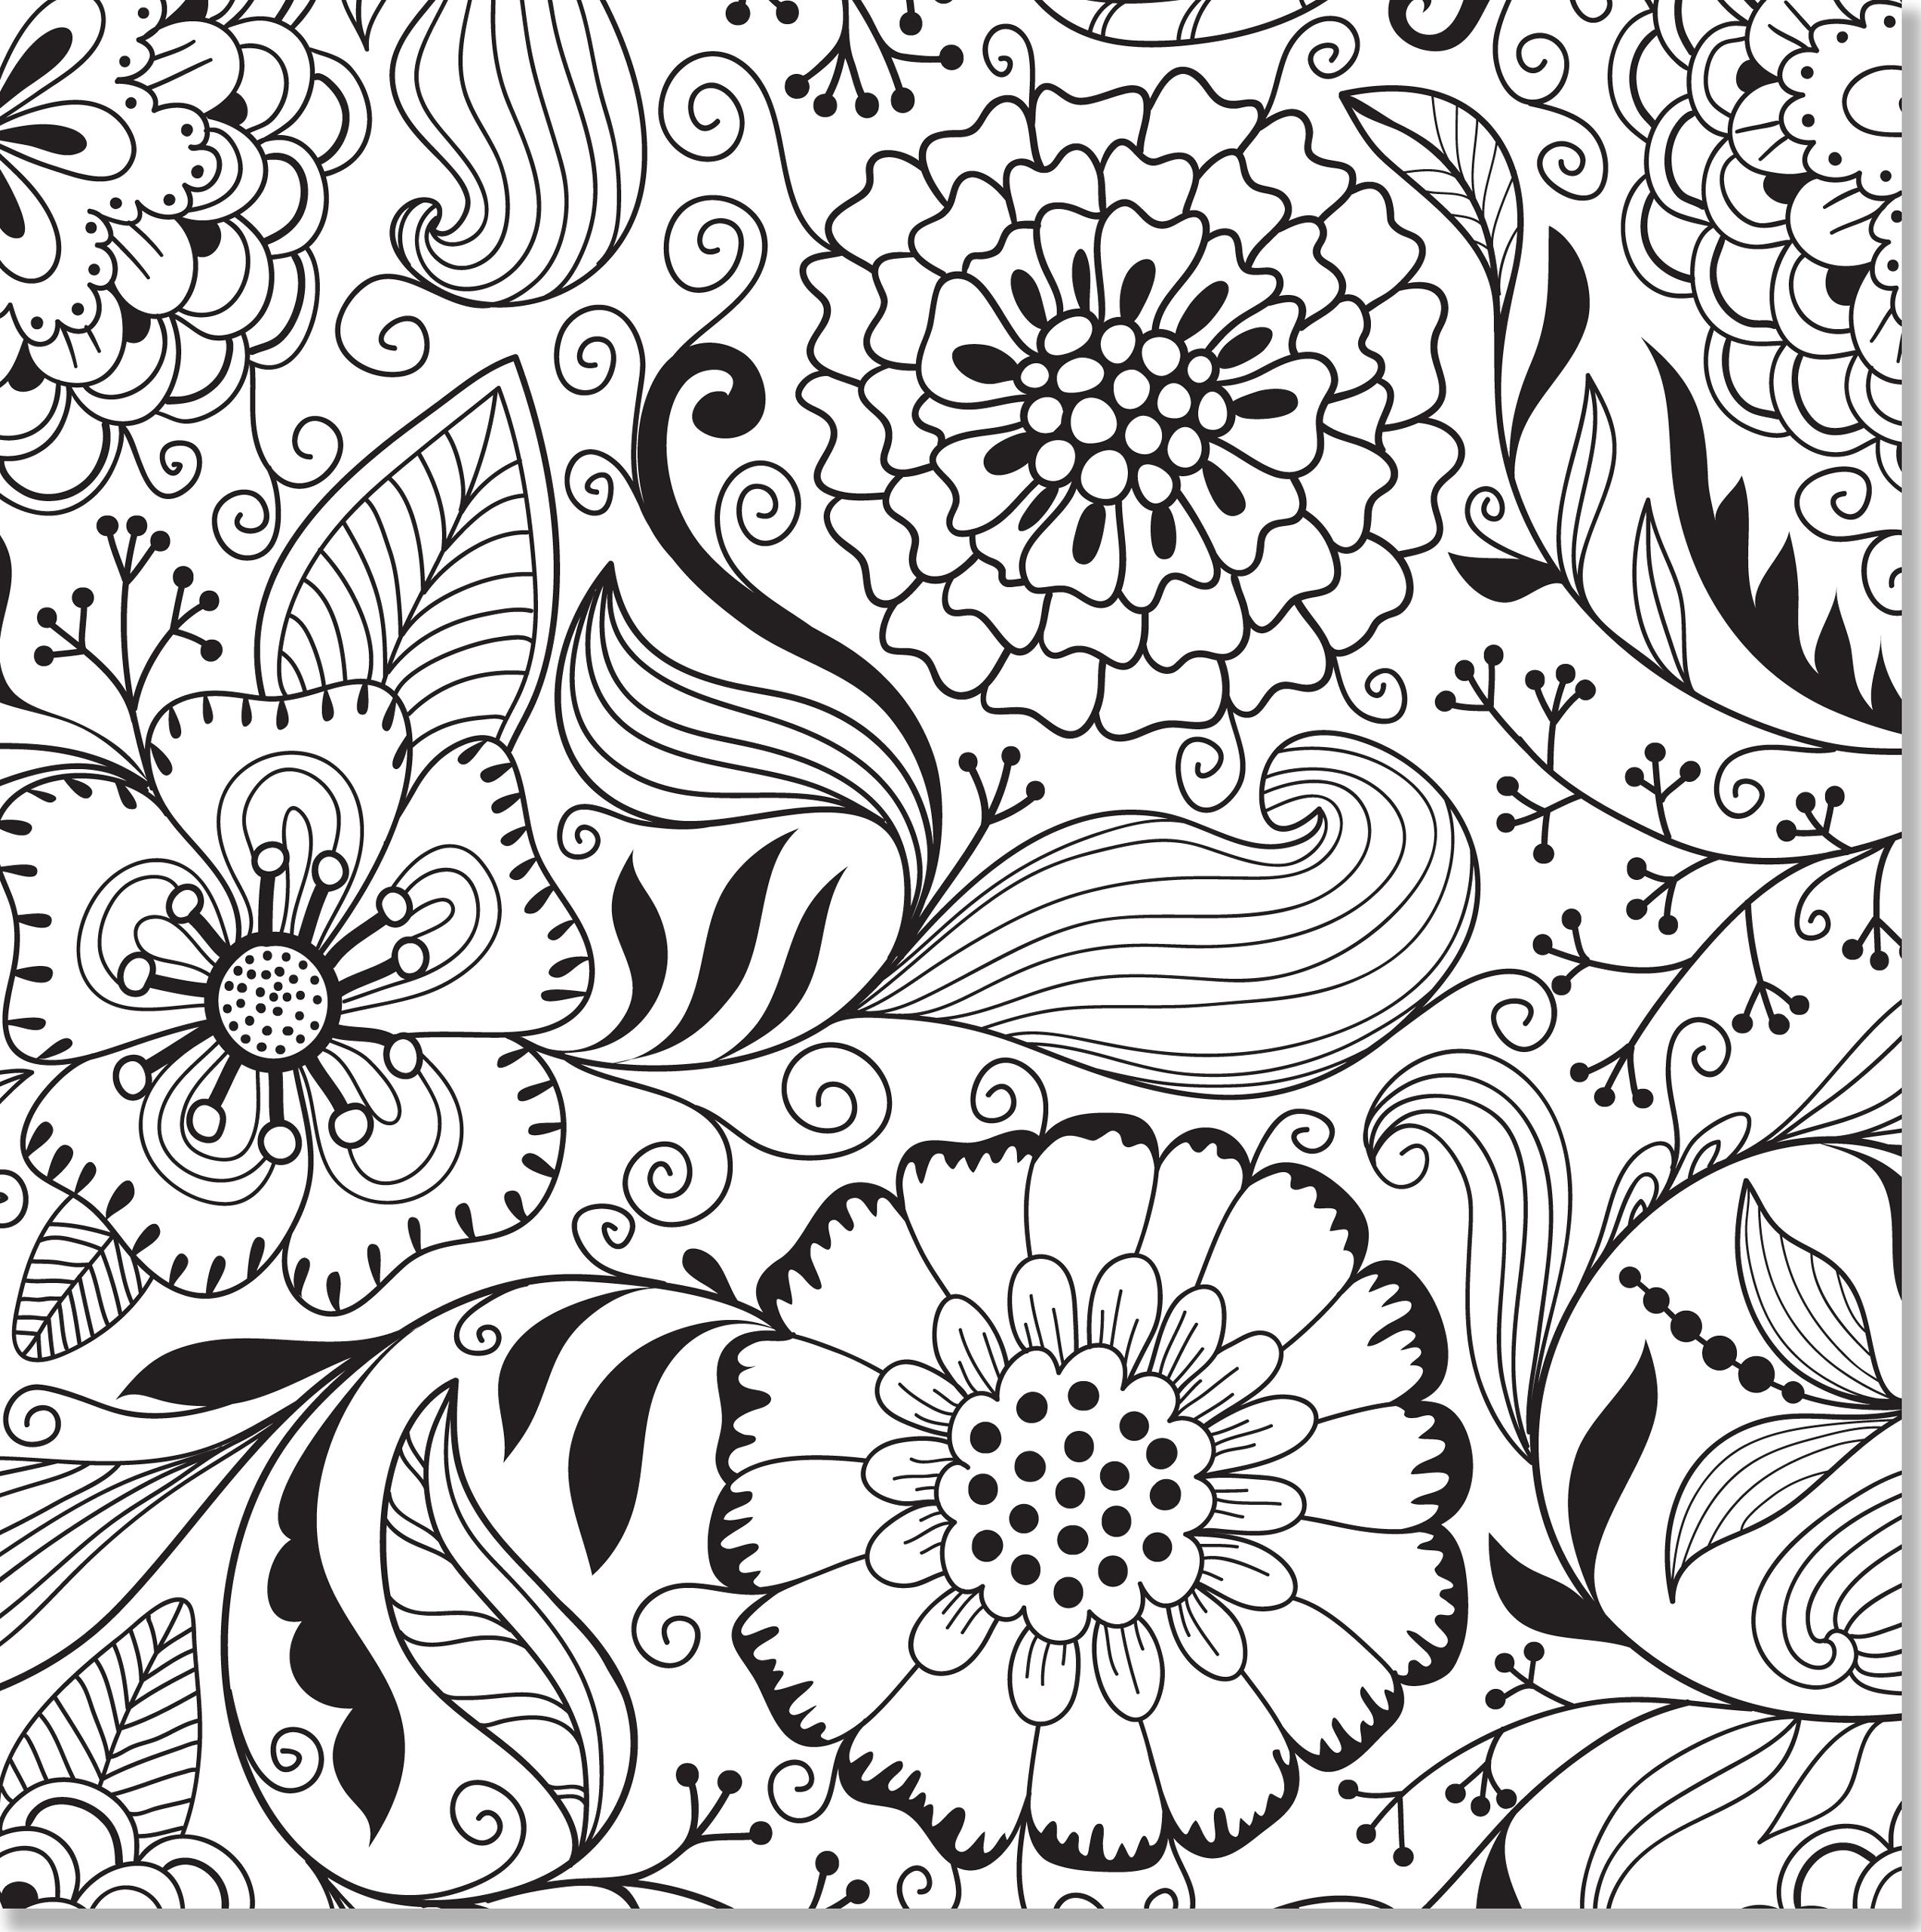 Coloring Pages Ideas Coloring Designs For Adults Circle Free Free Printable Coloring Designs